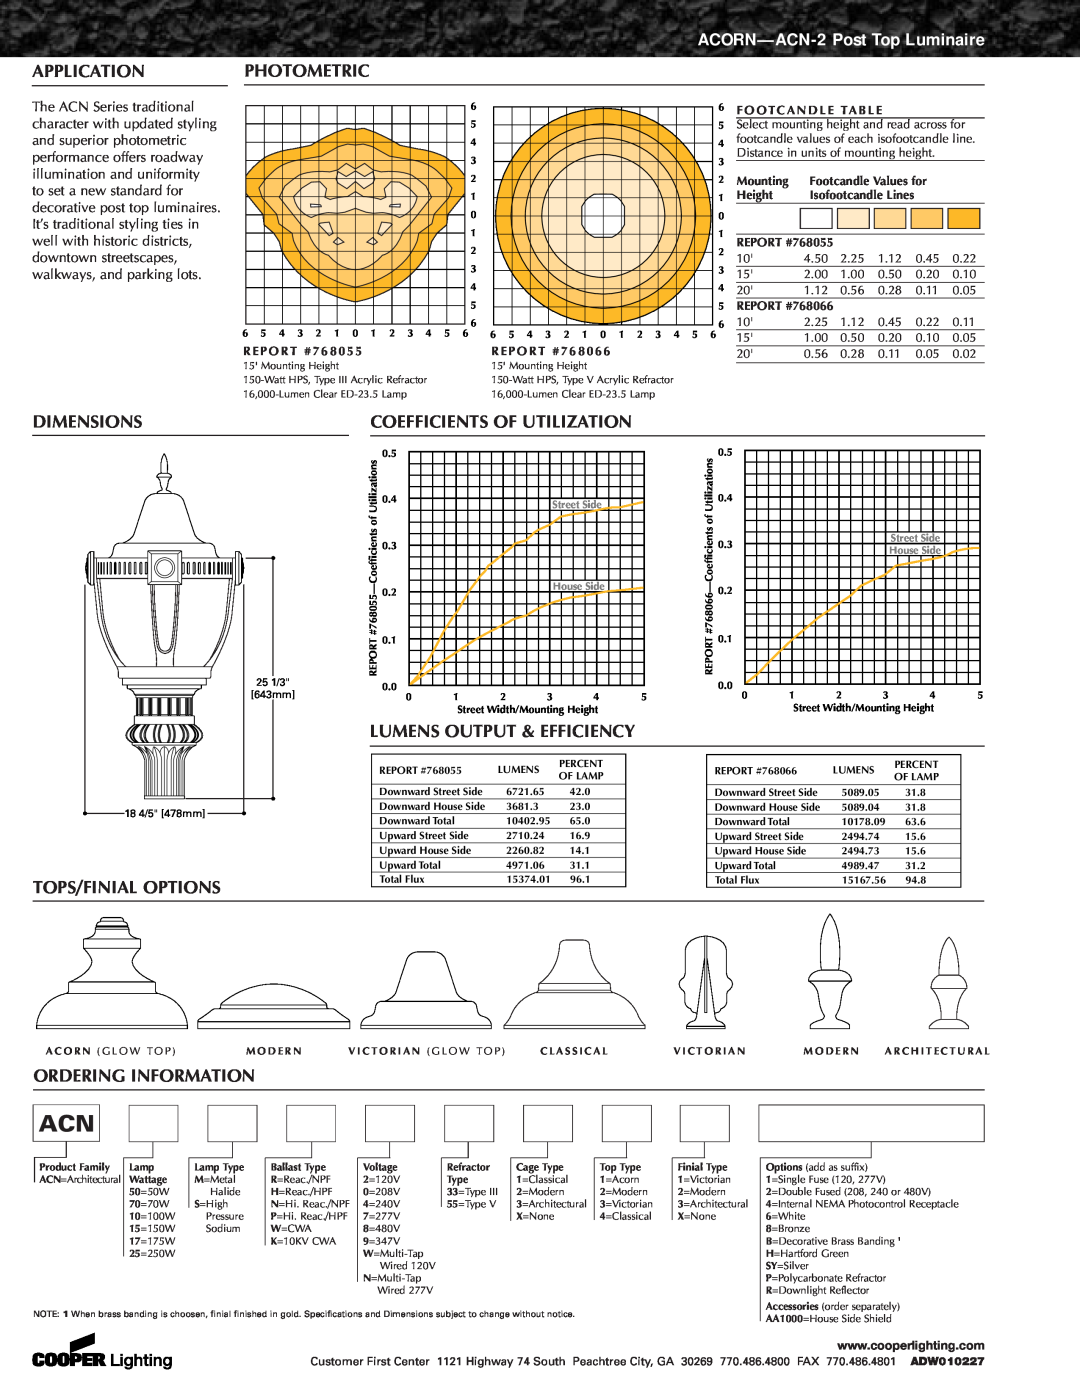 Cooper Lighting ACORN ACN-2 Application, Dimensions, Photometric, Coefficients Of Utilization, Lumens Output & Efficiency 